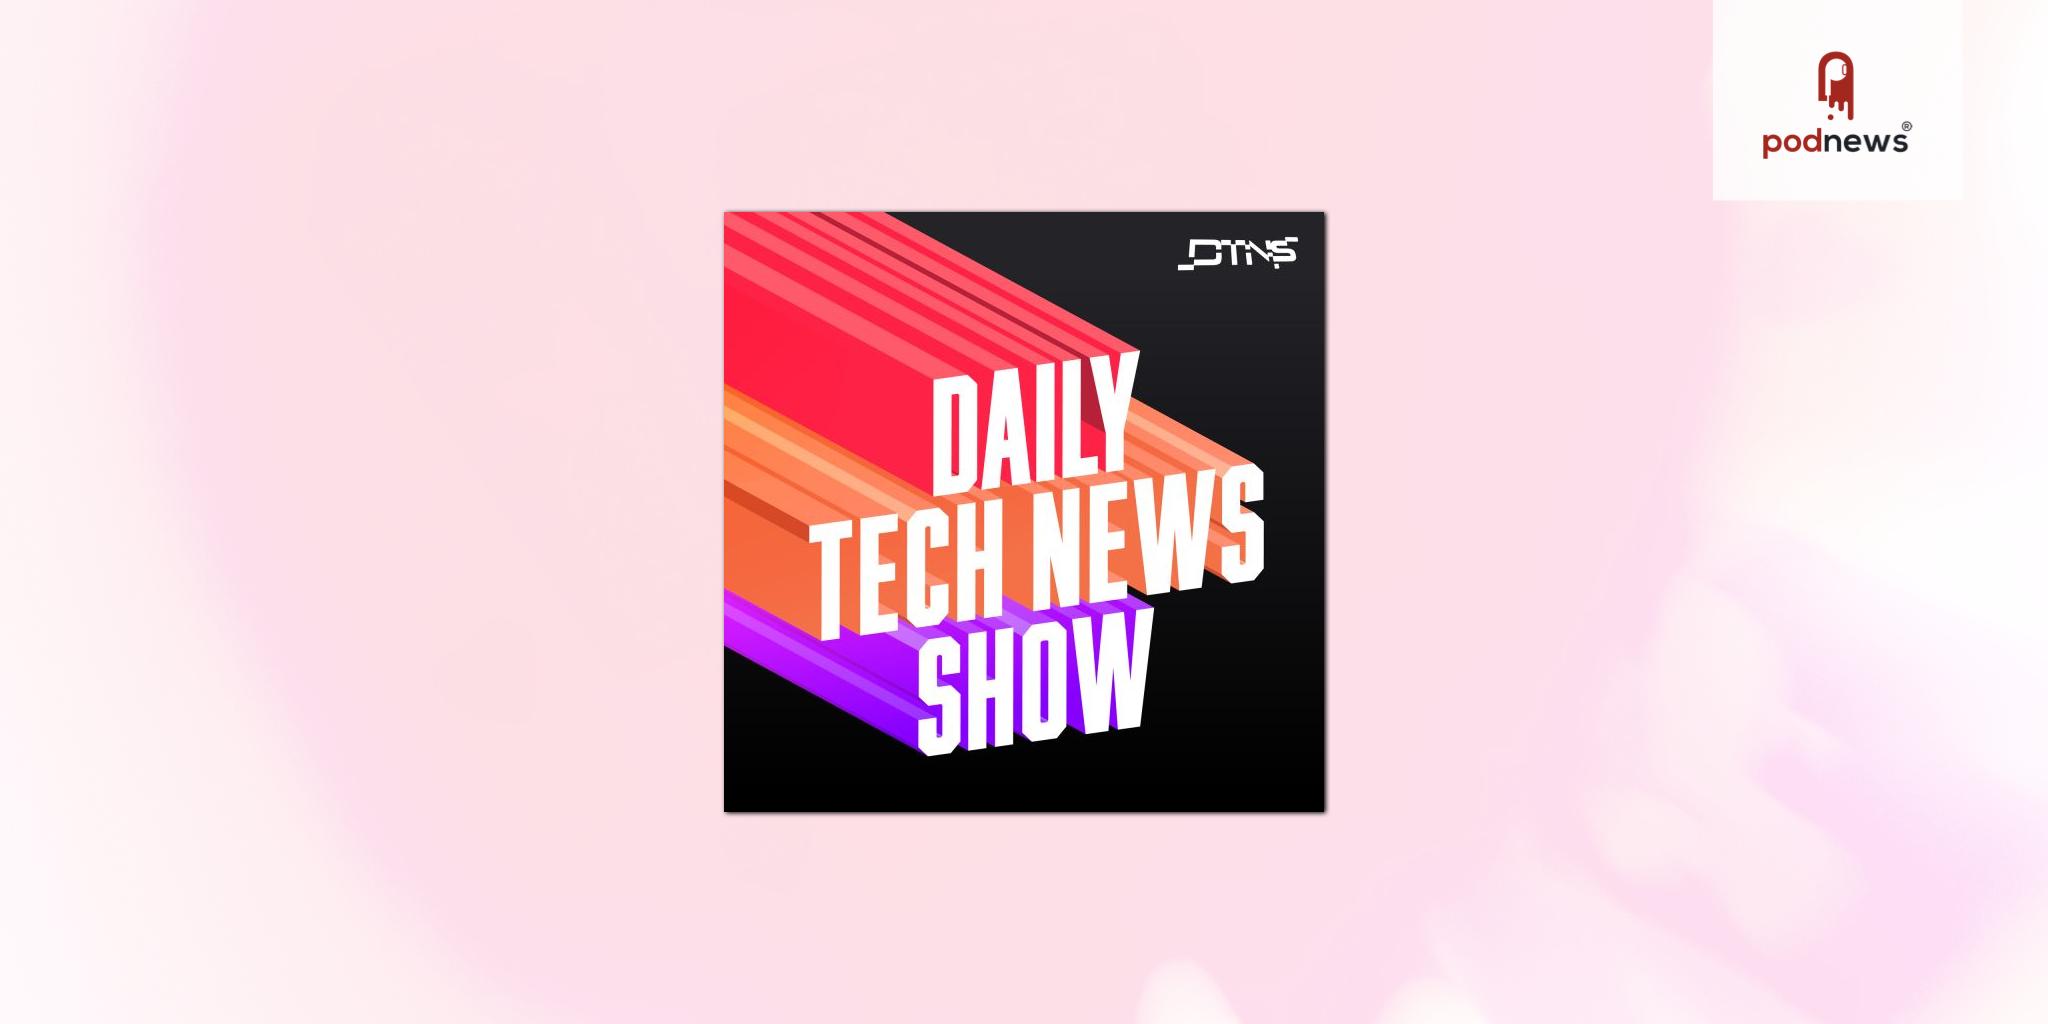 Daily Tech News Show Celebrates 10 Years in Podcasting